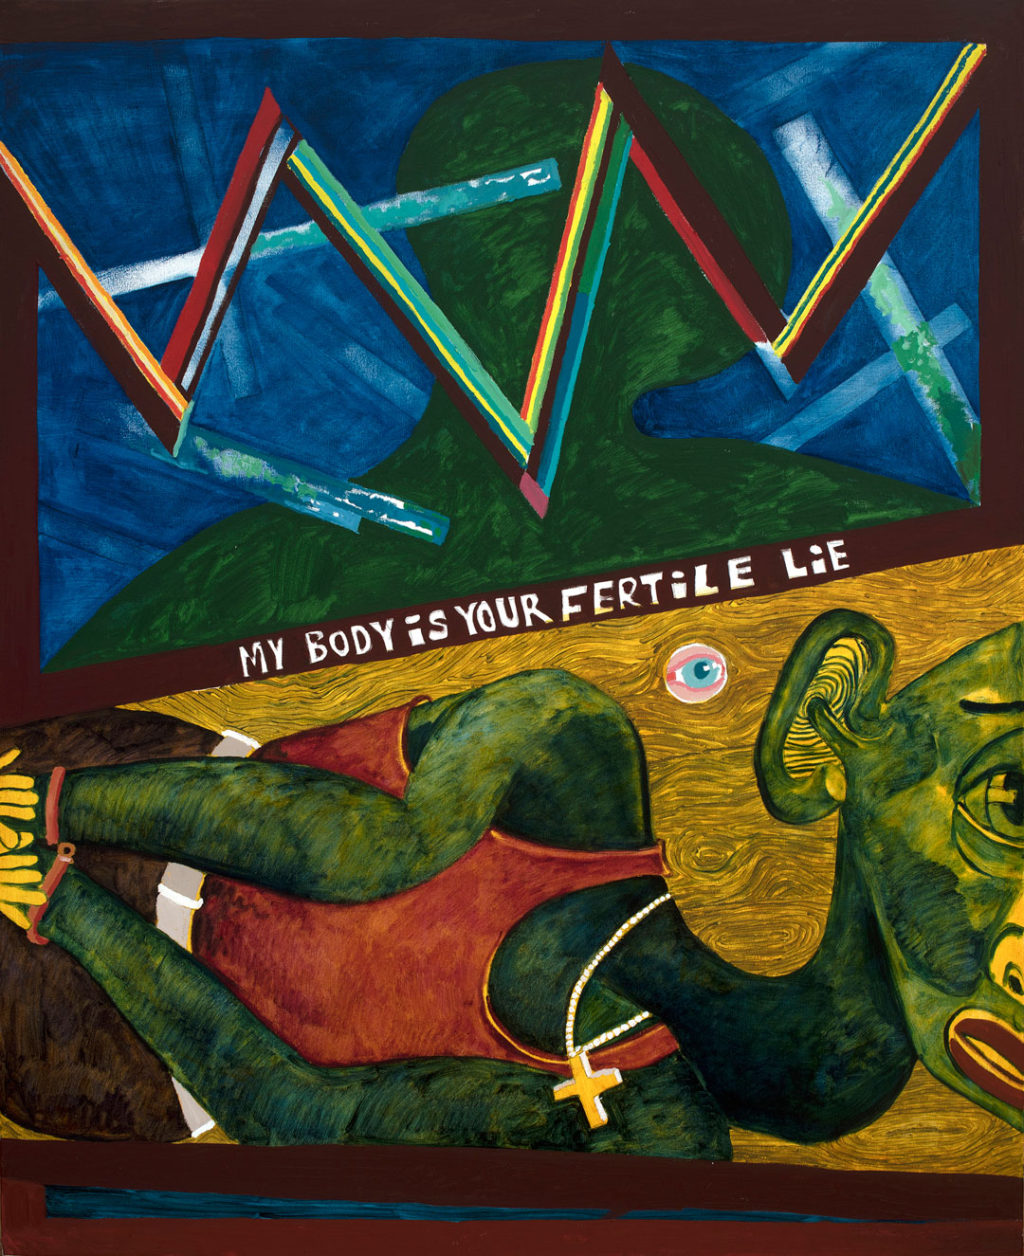 The painting The Death of George Floyd by Peter Williams. The painting is divided in half by a brown outline of a mountain range or crown with the words, “my body is your fertile lie.” Behind this shape in the upper half of the painting is an abstract silhouette of a green head on a blue background with different colored rectangles cascading around the body. Below this is George Floyd. His hands are held in cuffs and he looks out beyond the canvas with an expression of sadness. Behind him, suspended within a wood grain texture is a single blue eye.The painting The Death of George Floyd by Peter Williams. The painting is divided in half by a brown outline of a mountain range or crown with the words, “my body is your fertile lie.” Behind this shape in the upper half of the painting is an abstract silhouette of a green head on a blue background with different colored rectangles cascading around the body. Below this is George Floyd. His hands are held in cuffs and he looks out beyond the canvas with an expression of sadness. Behind him, suspended within a wood grain texture is a single blue eye.